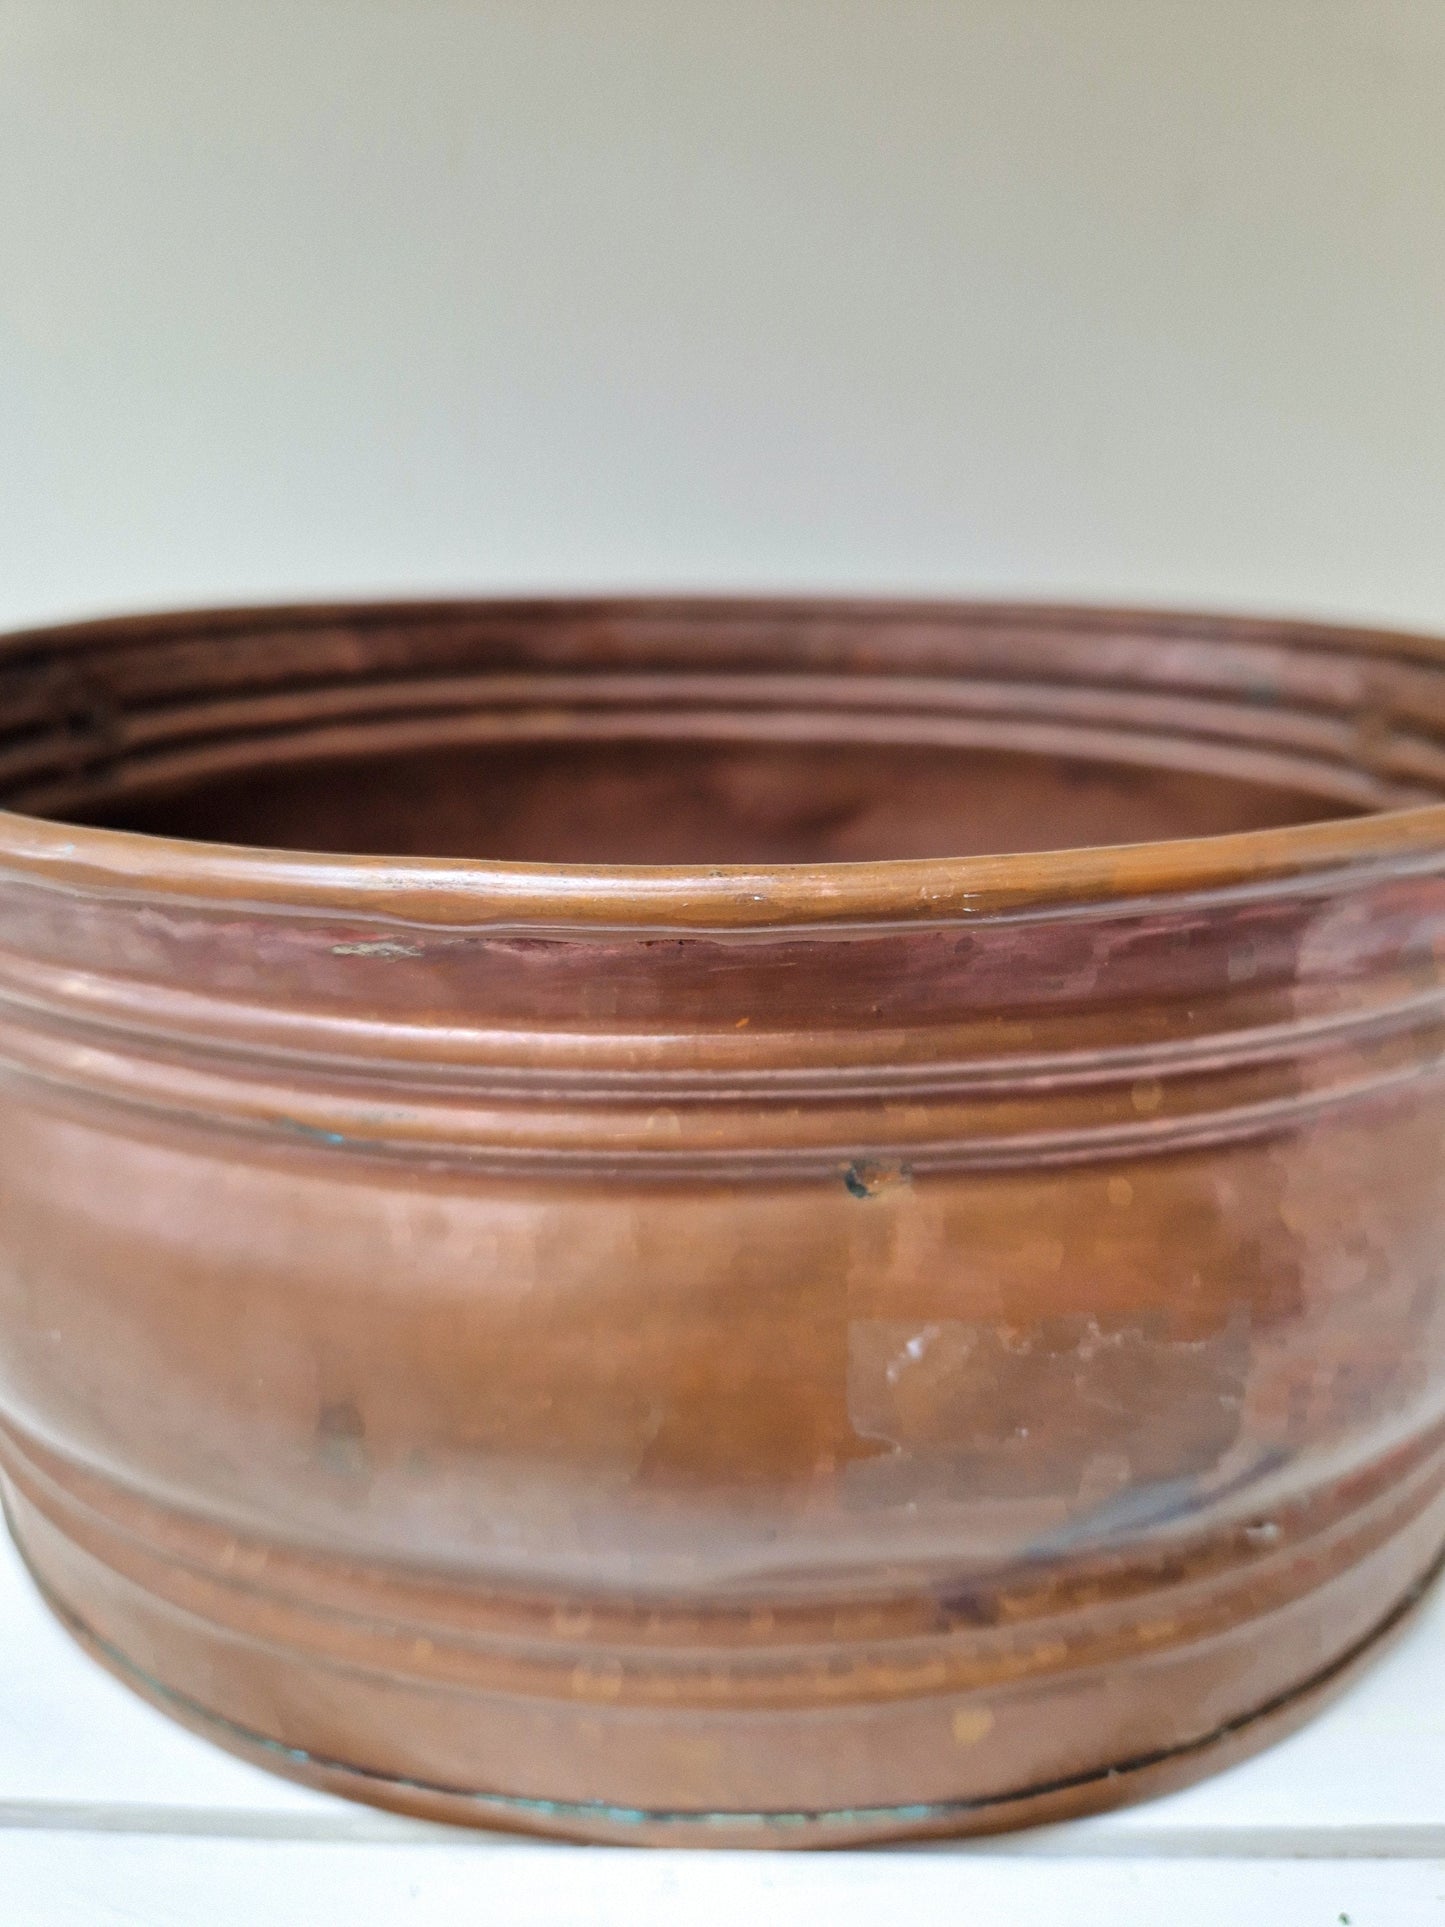 Vintage French copper and brass planter jardinière cache pot with handles Compact oval indoor gardening flower or plant holder Rustic Gift